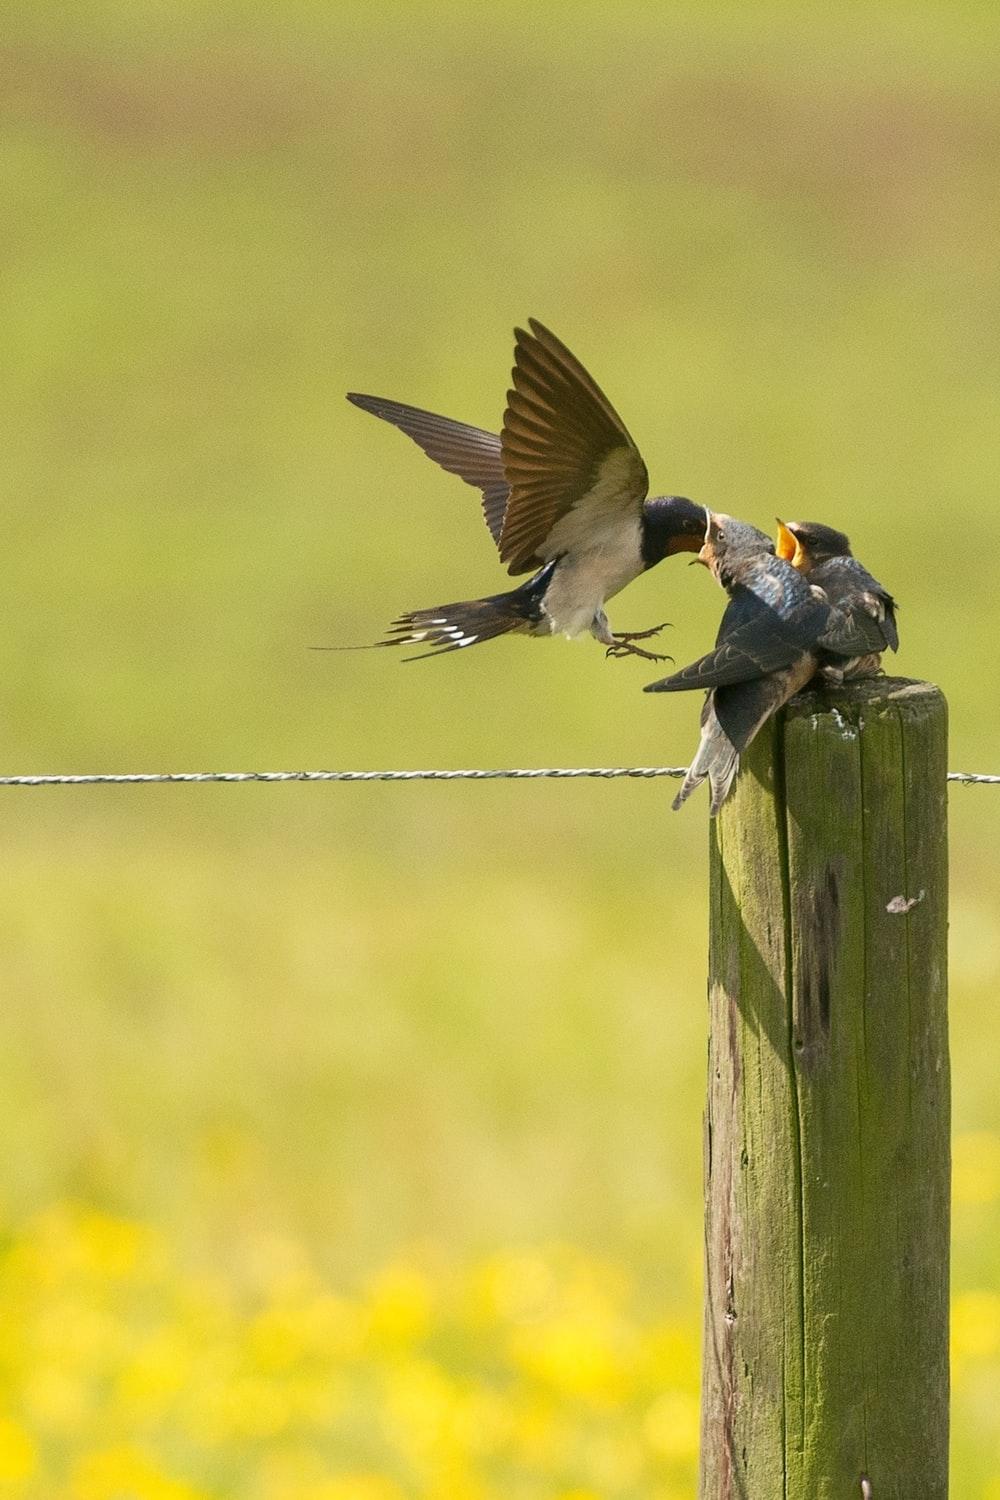 Swallow Picture. Download Free Image